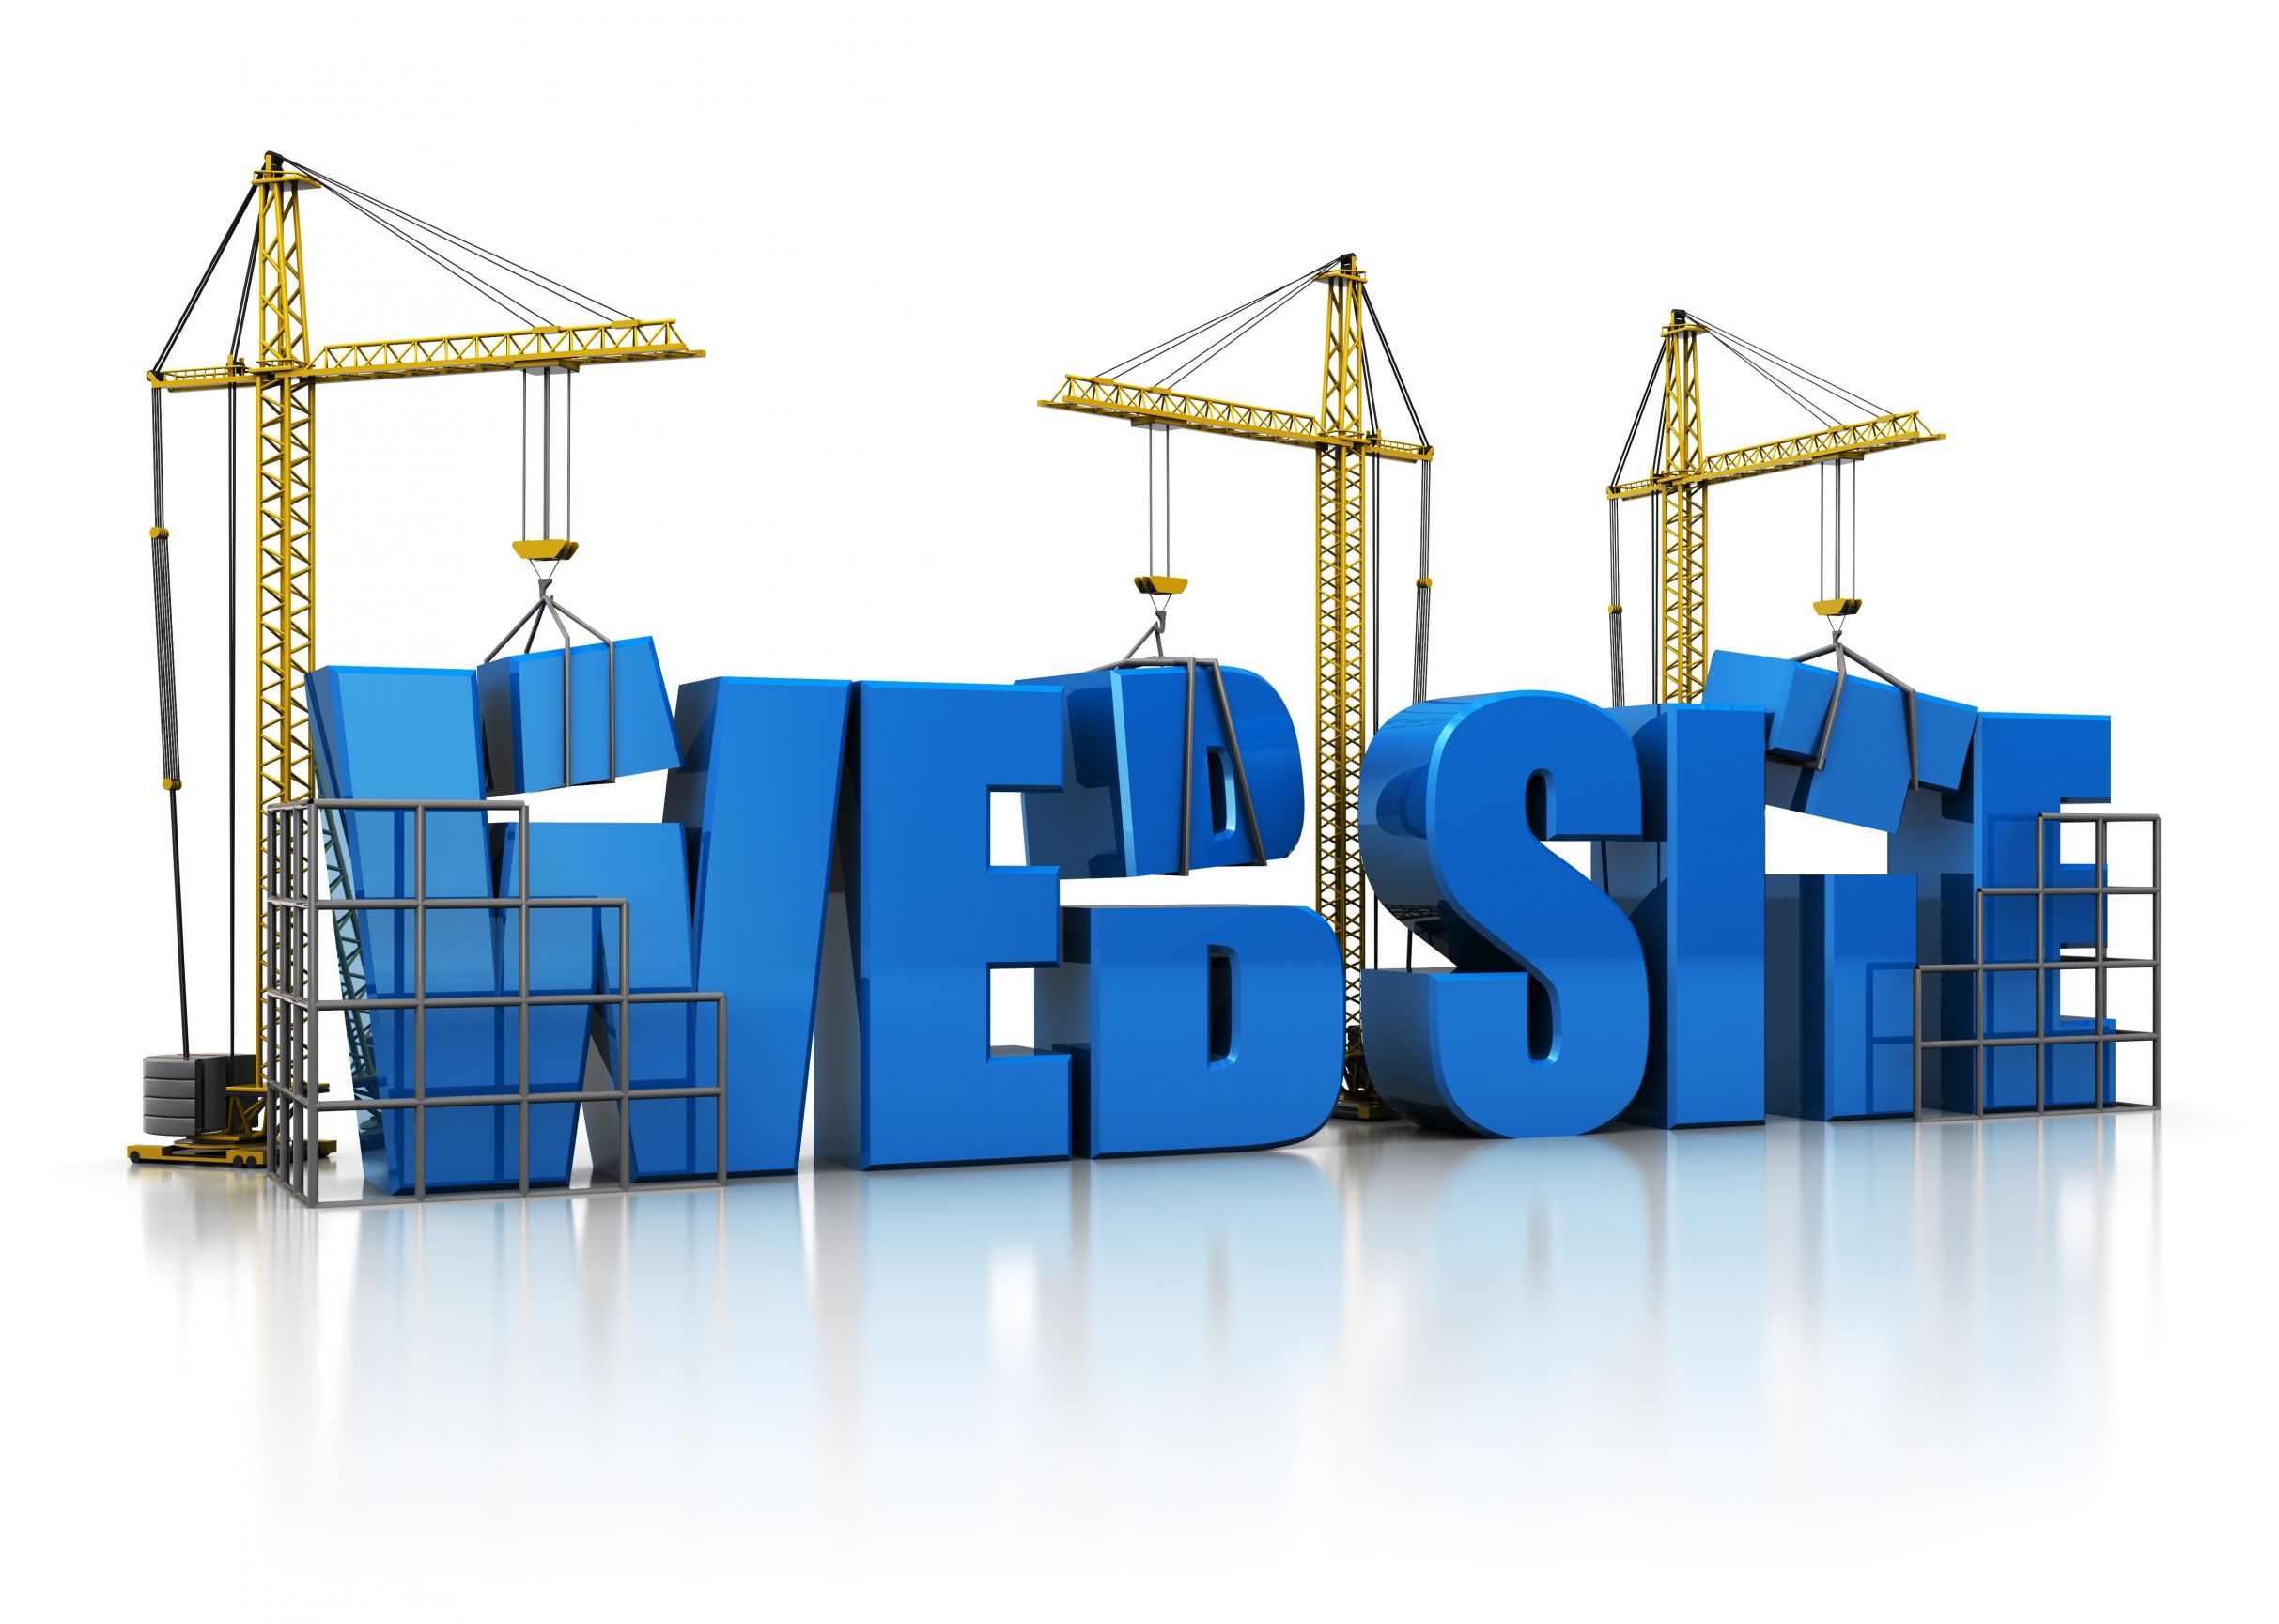 What Are The Six Amazing Qualities Of Best Website?